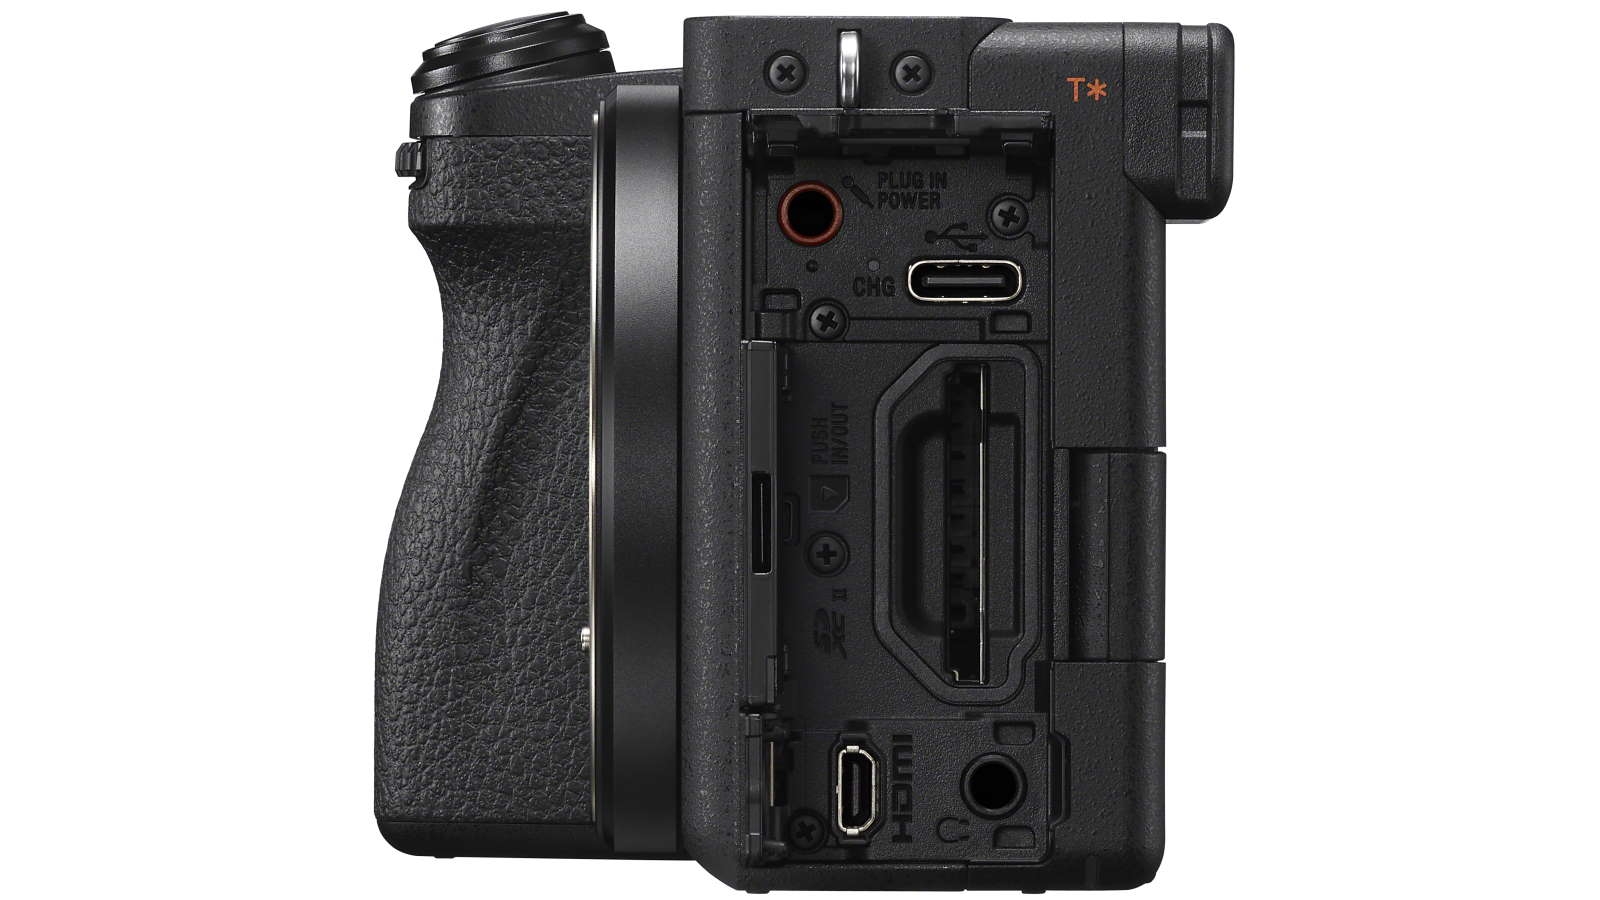 Sony Alpha 6700 APS-C Mirrorless Camera - Body Only (ILCE-6700)